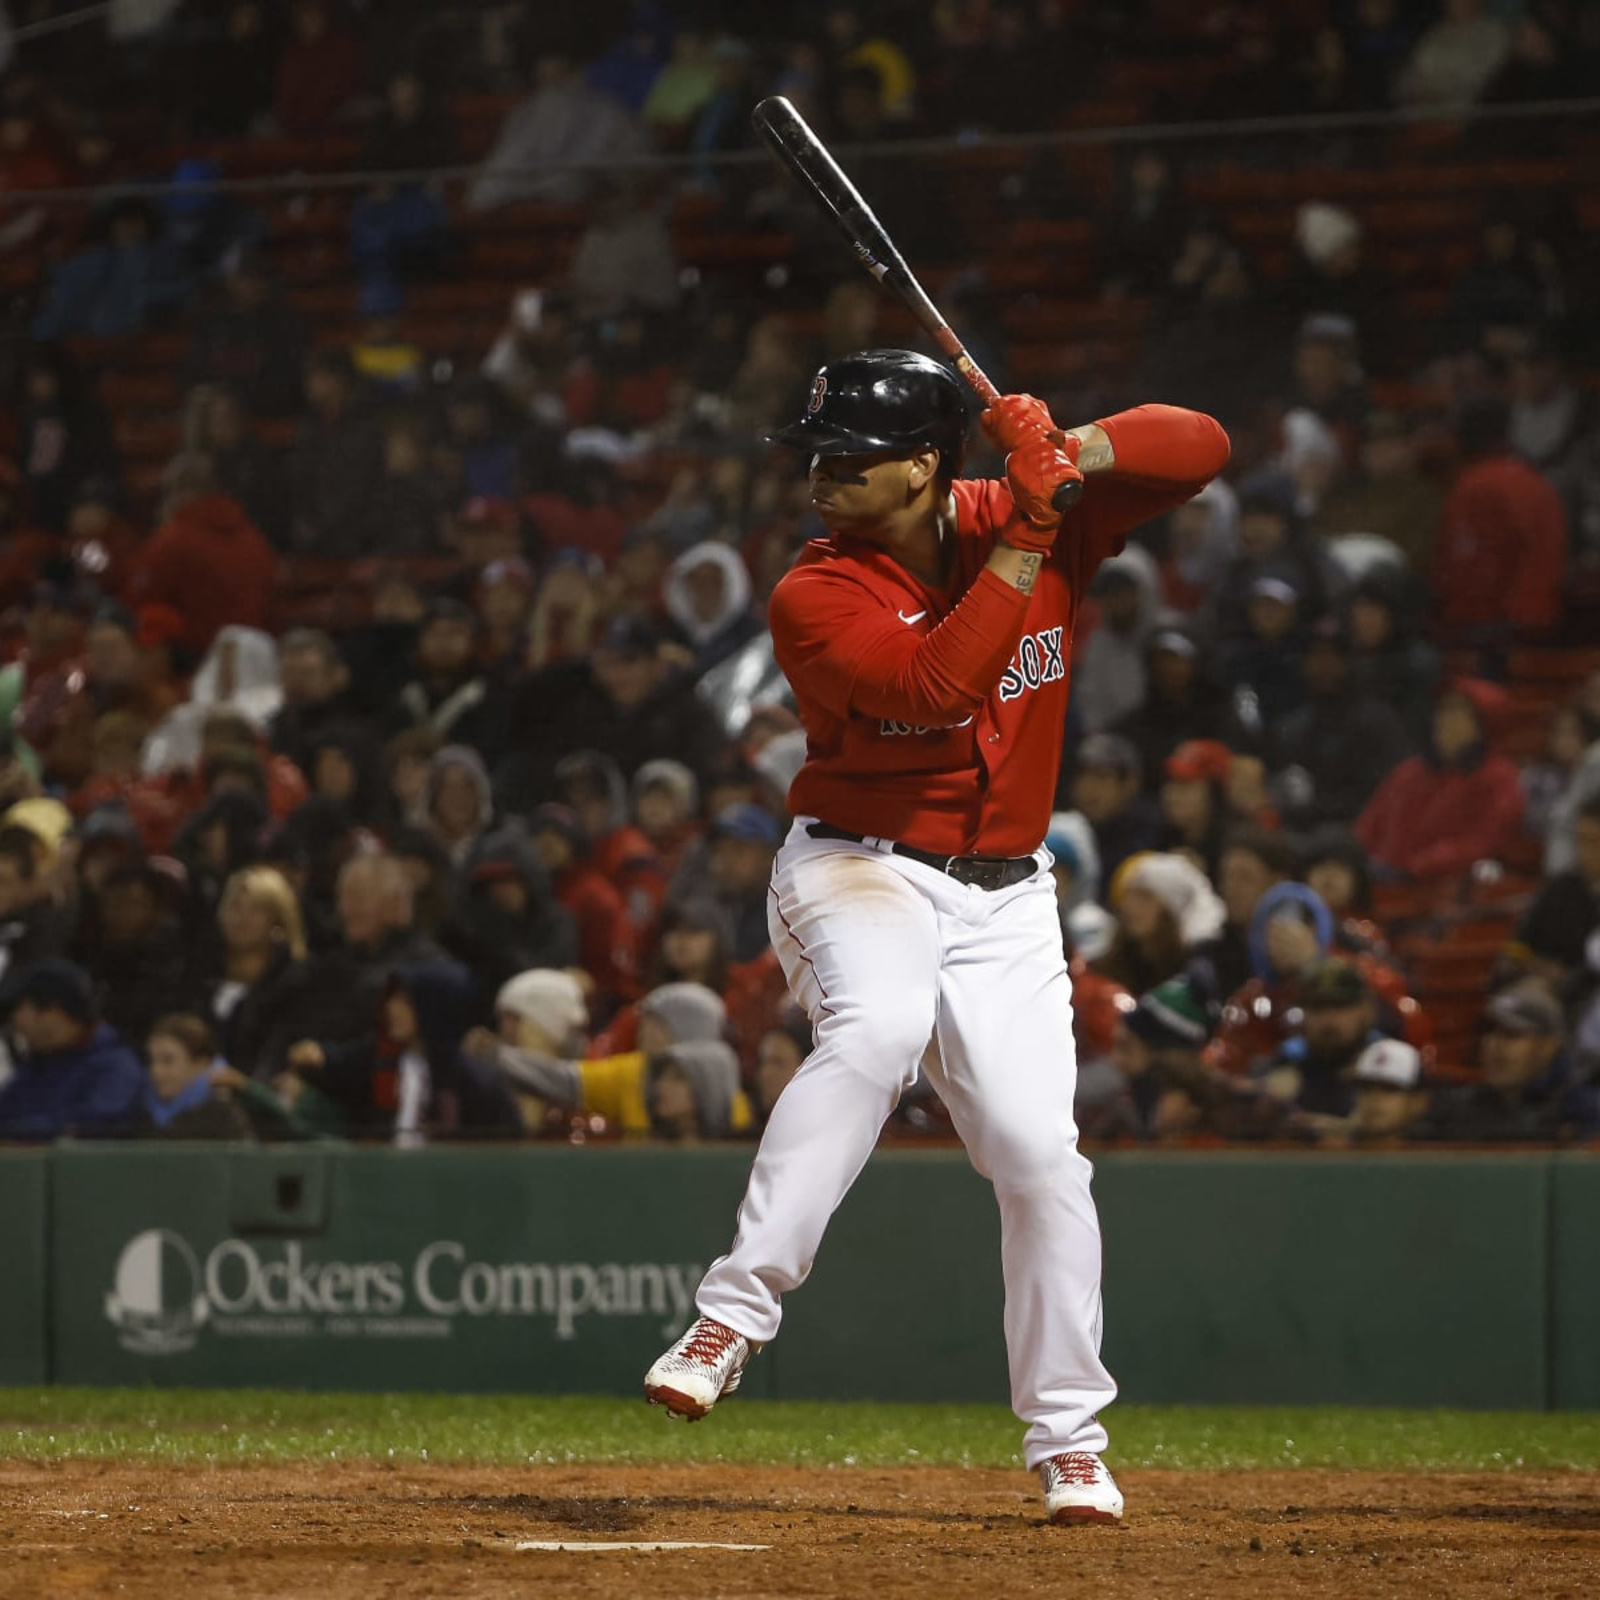 A $17 million annual deal by the Red Sox stokes debate on the